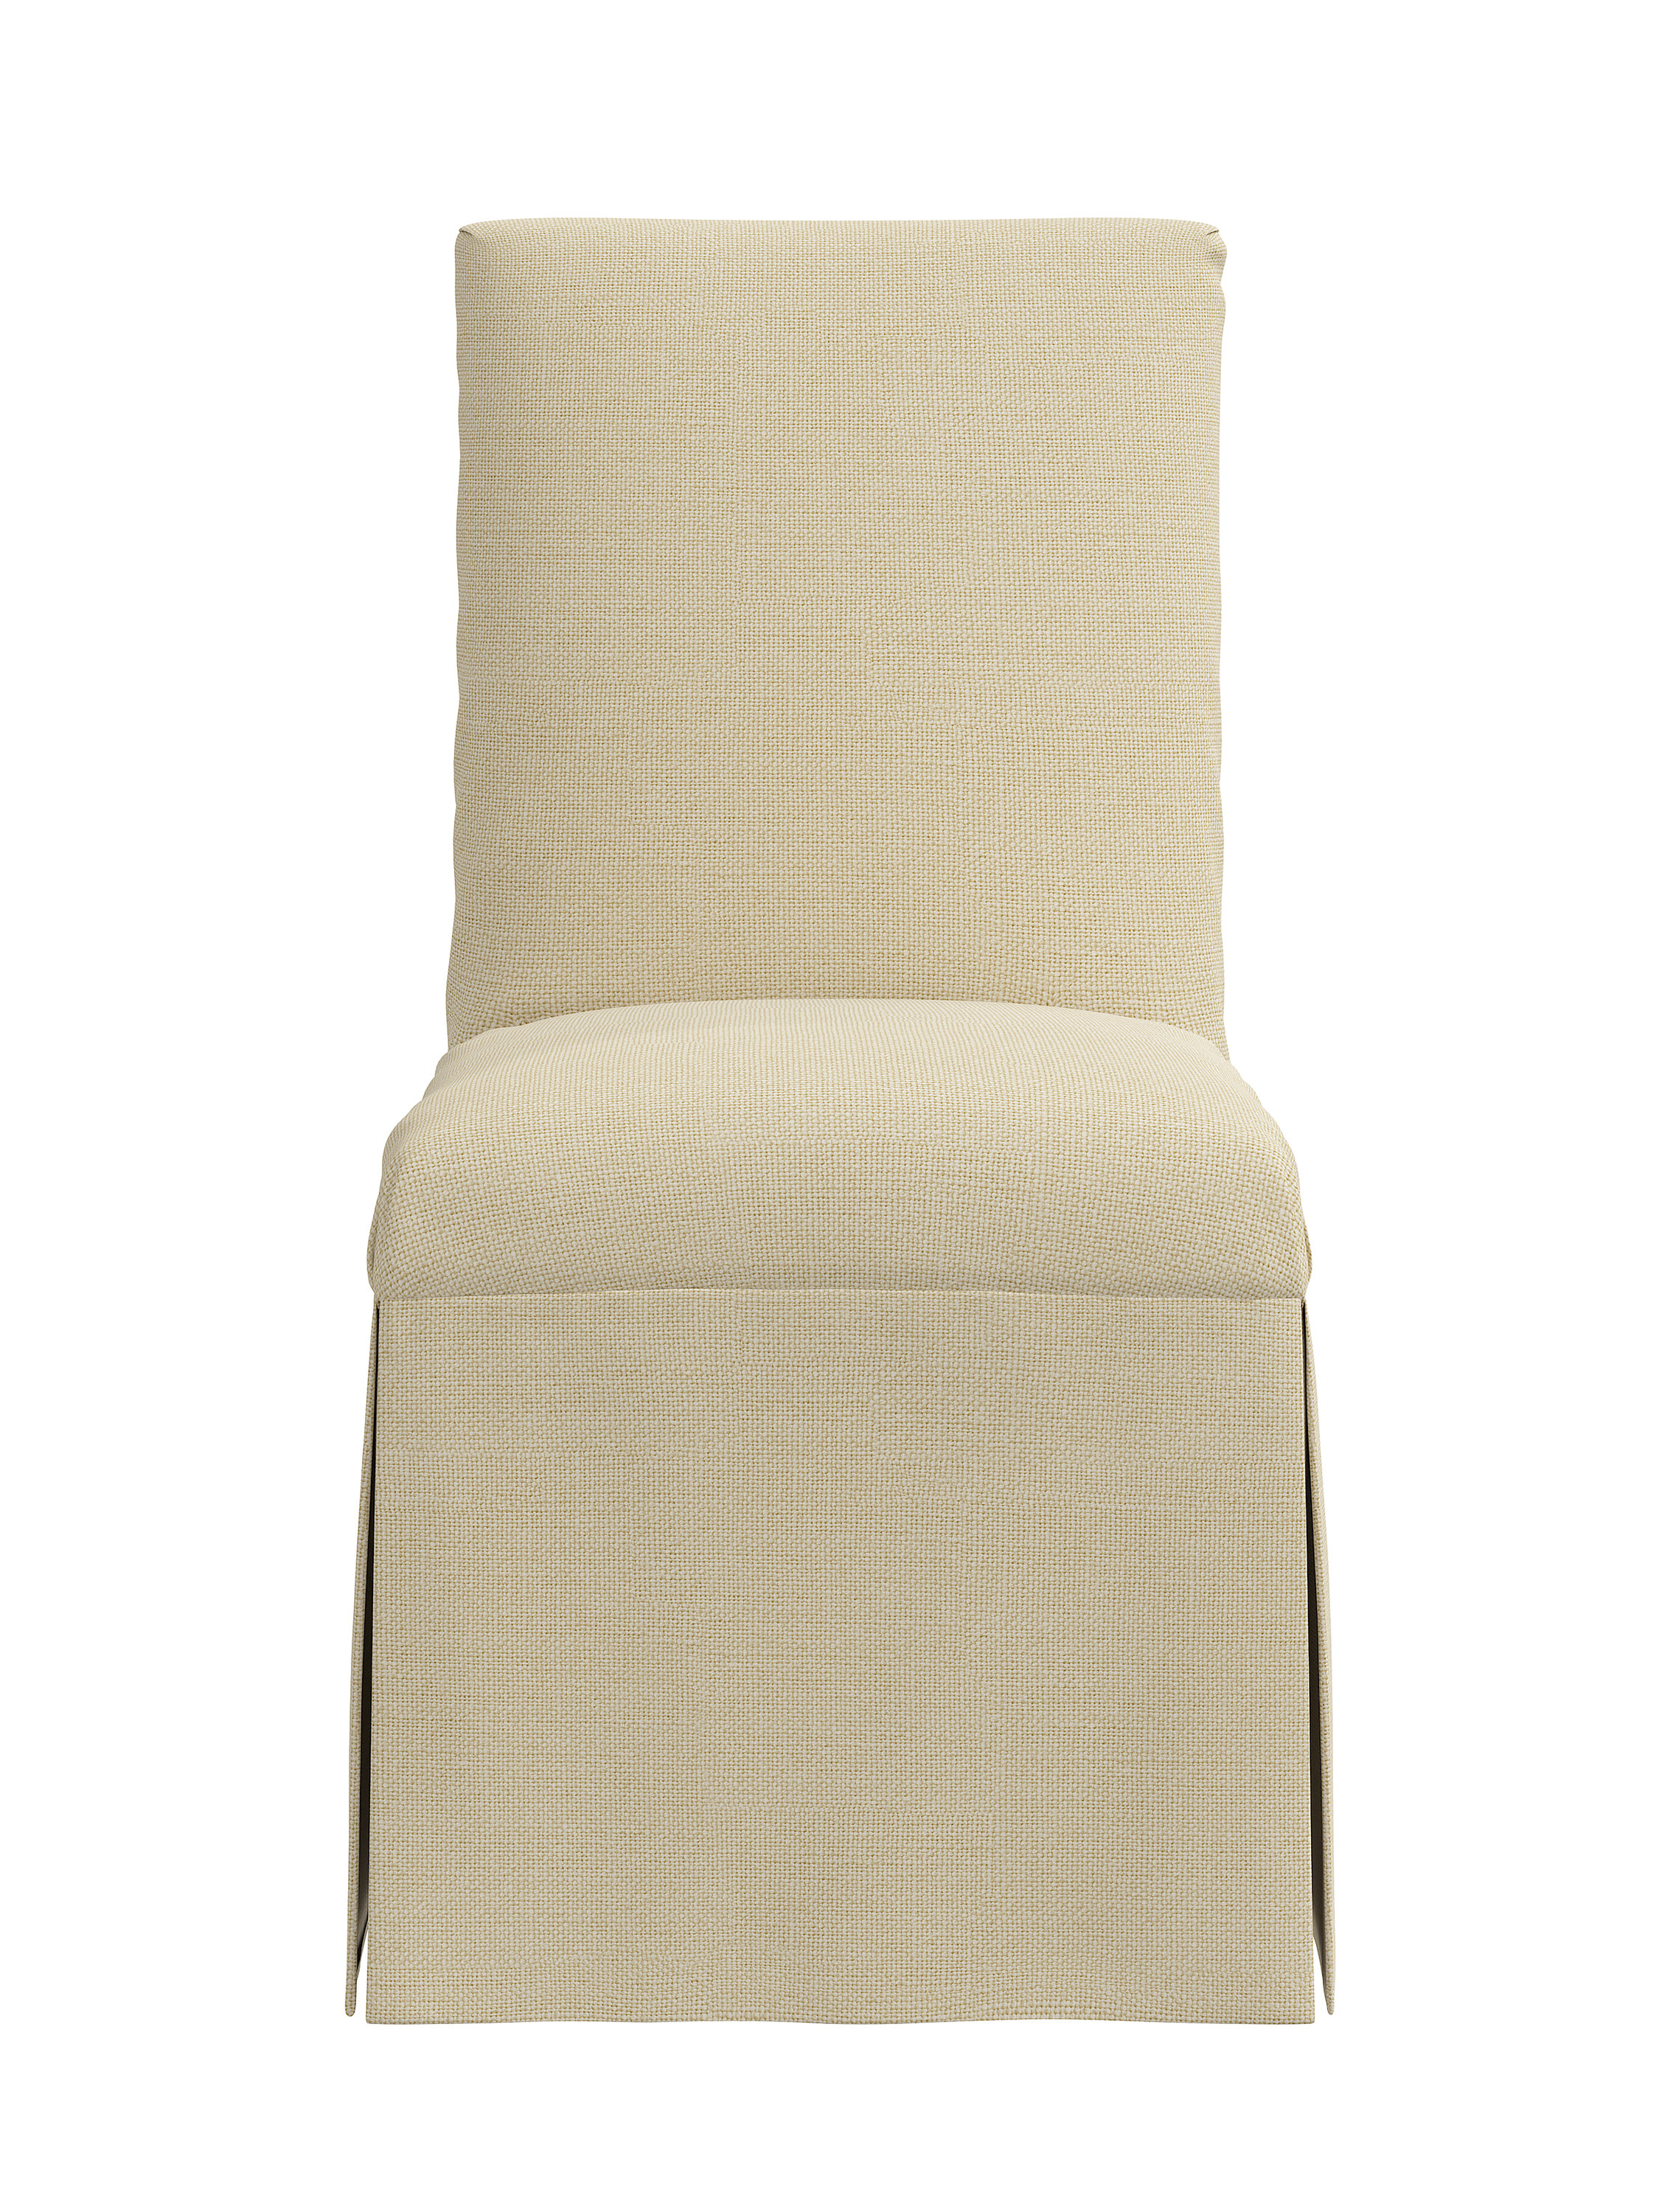 FITZROY TUFTED CHAIR - FASNACHT linen